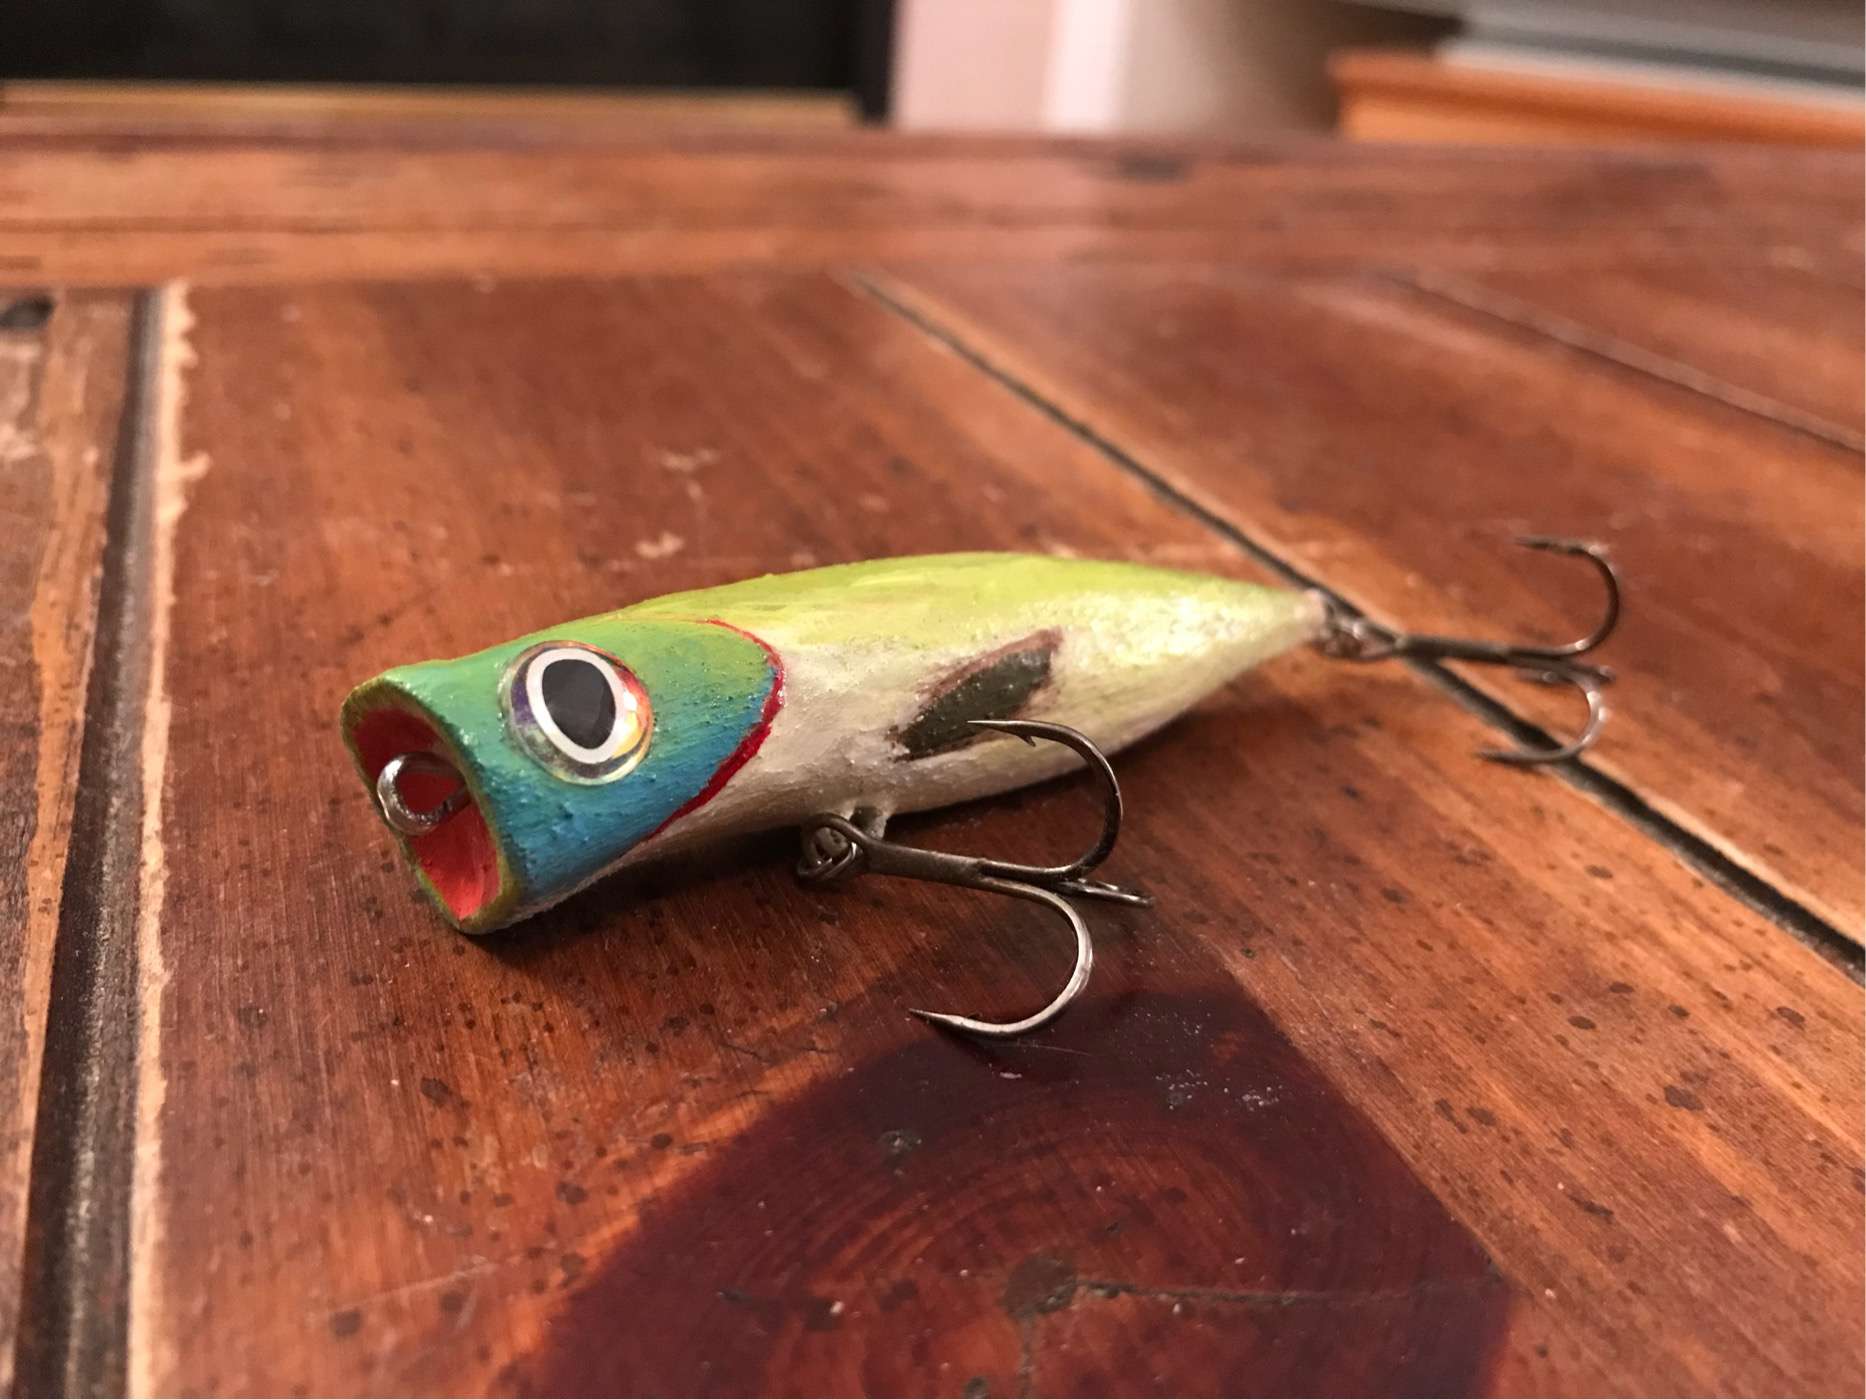 Lure Maker Identification Please - The Traditional Fisherman's Forum